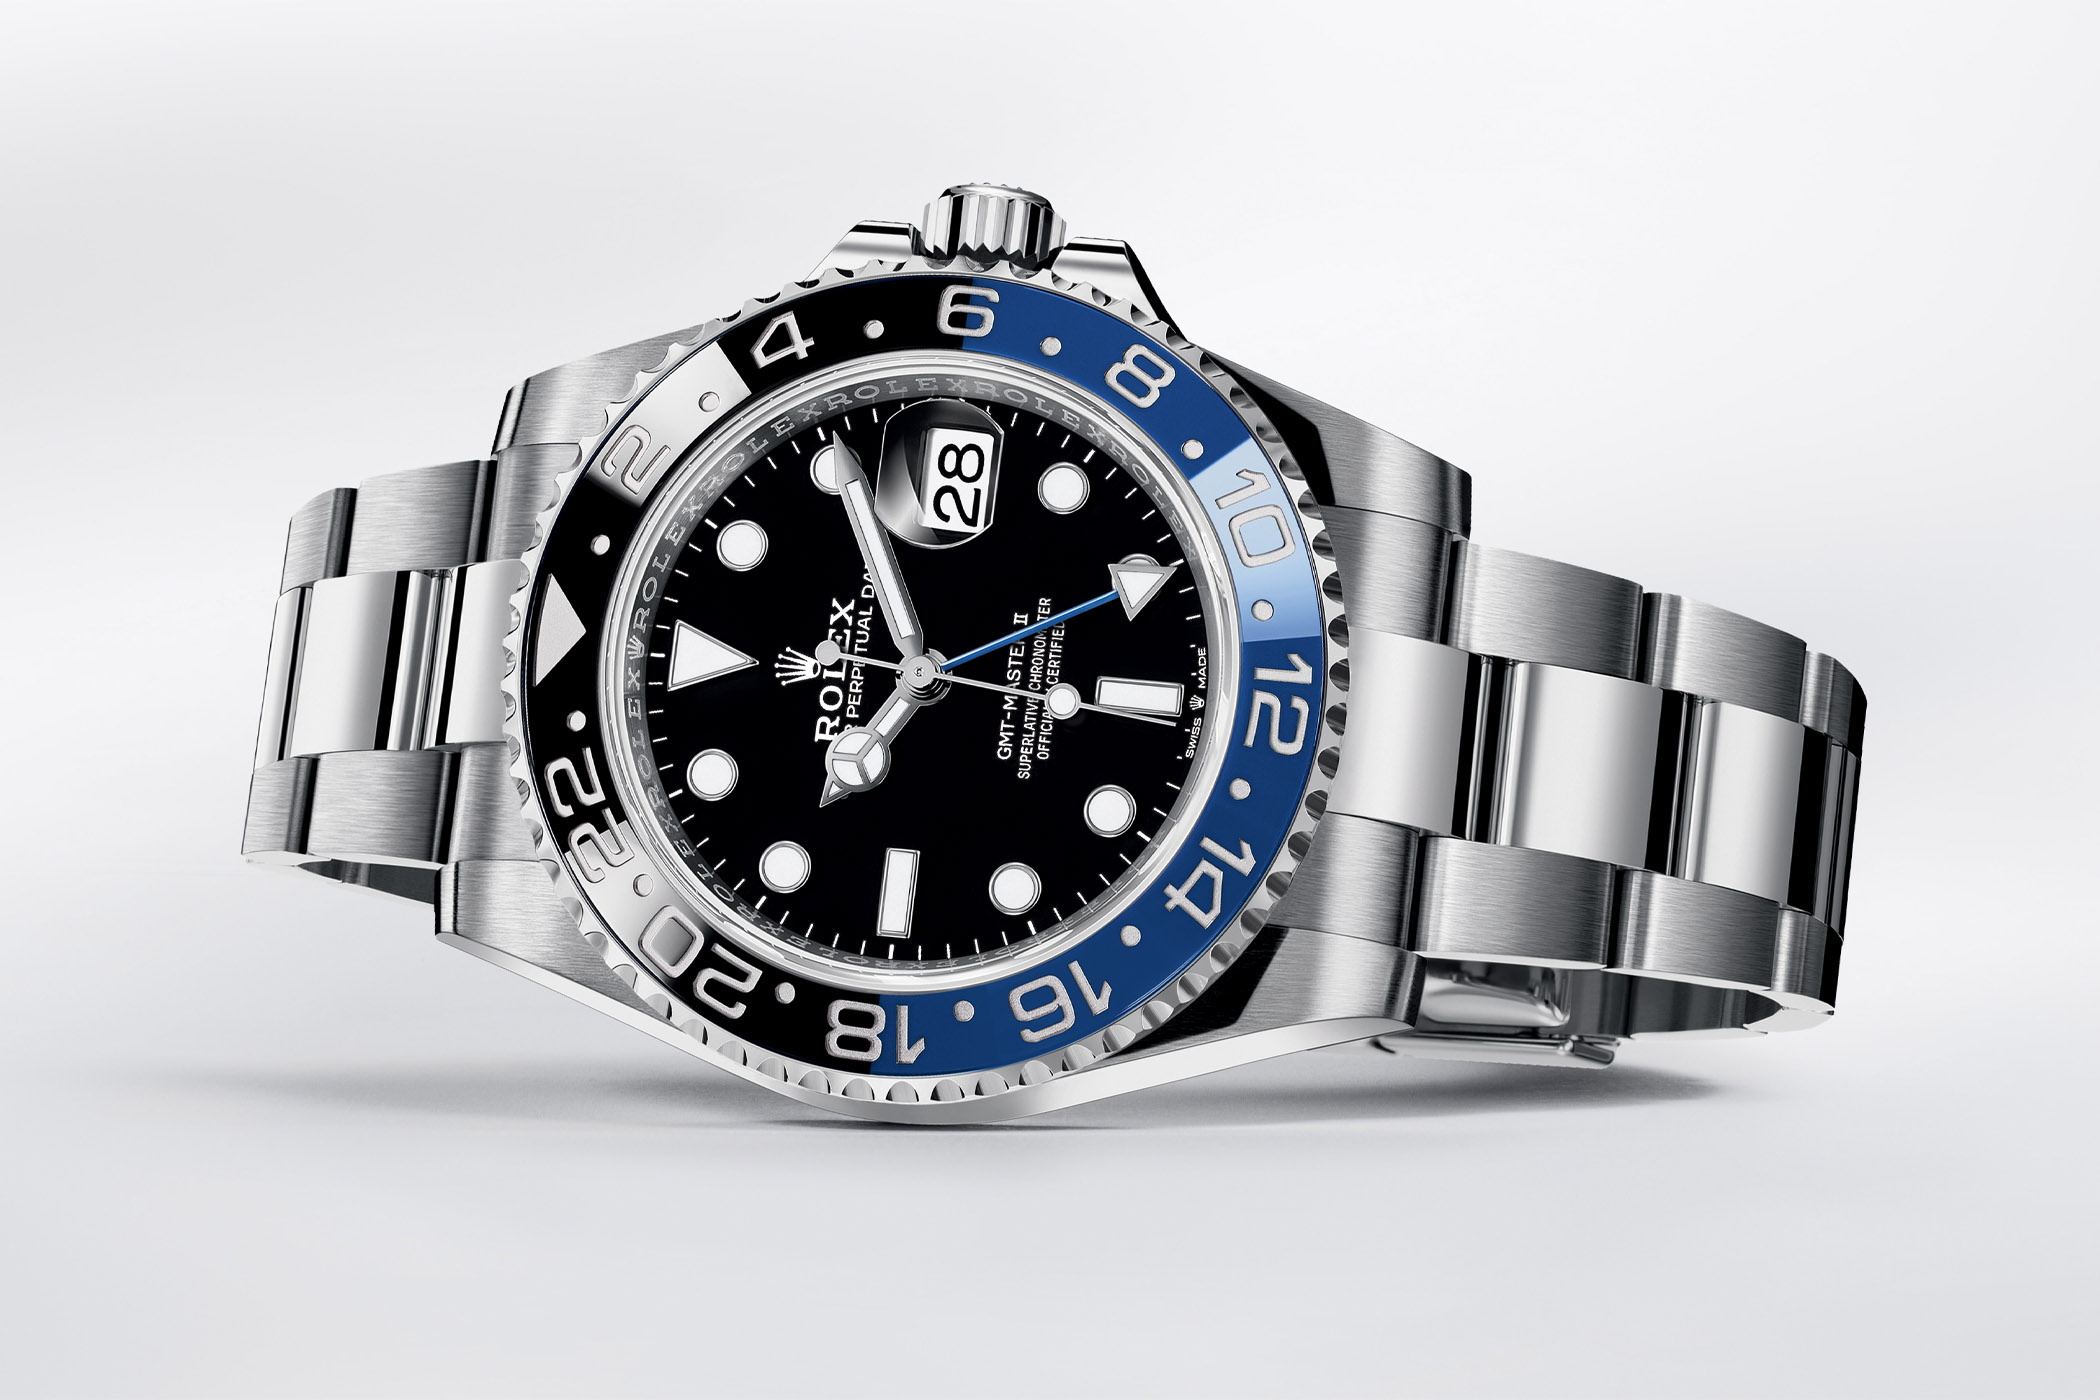 Get to Know More About the Rolex GMT Master ll